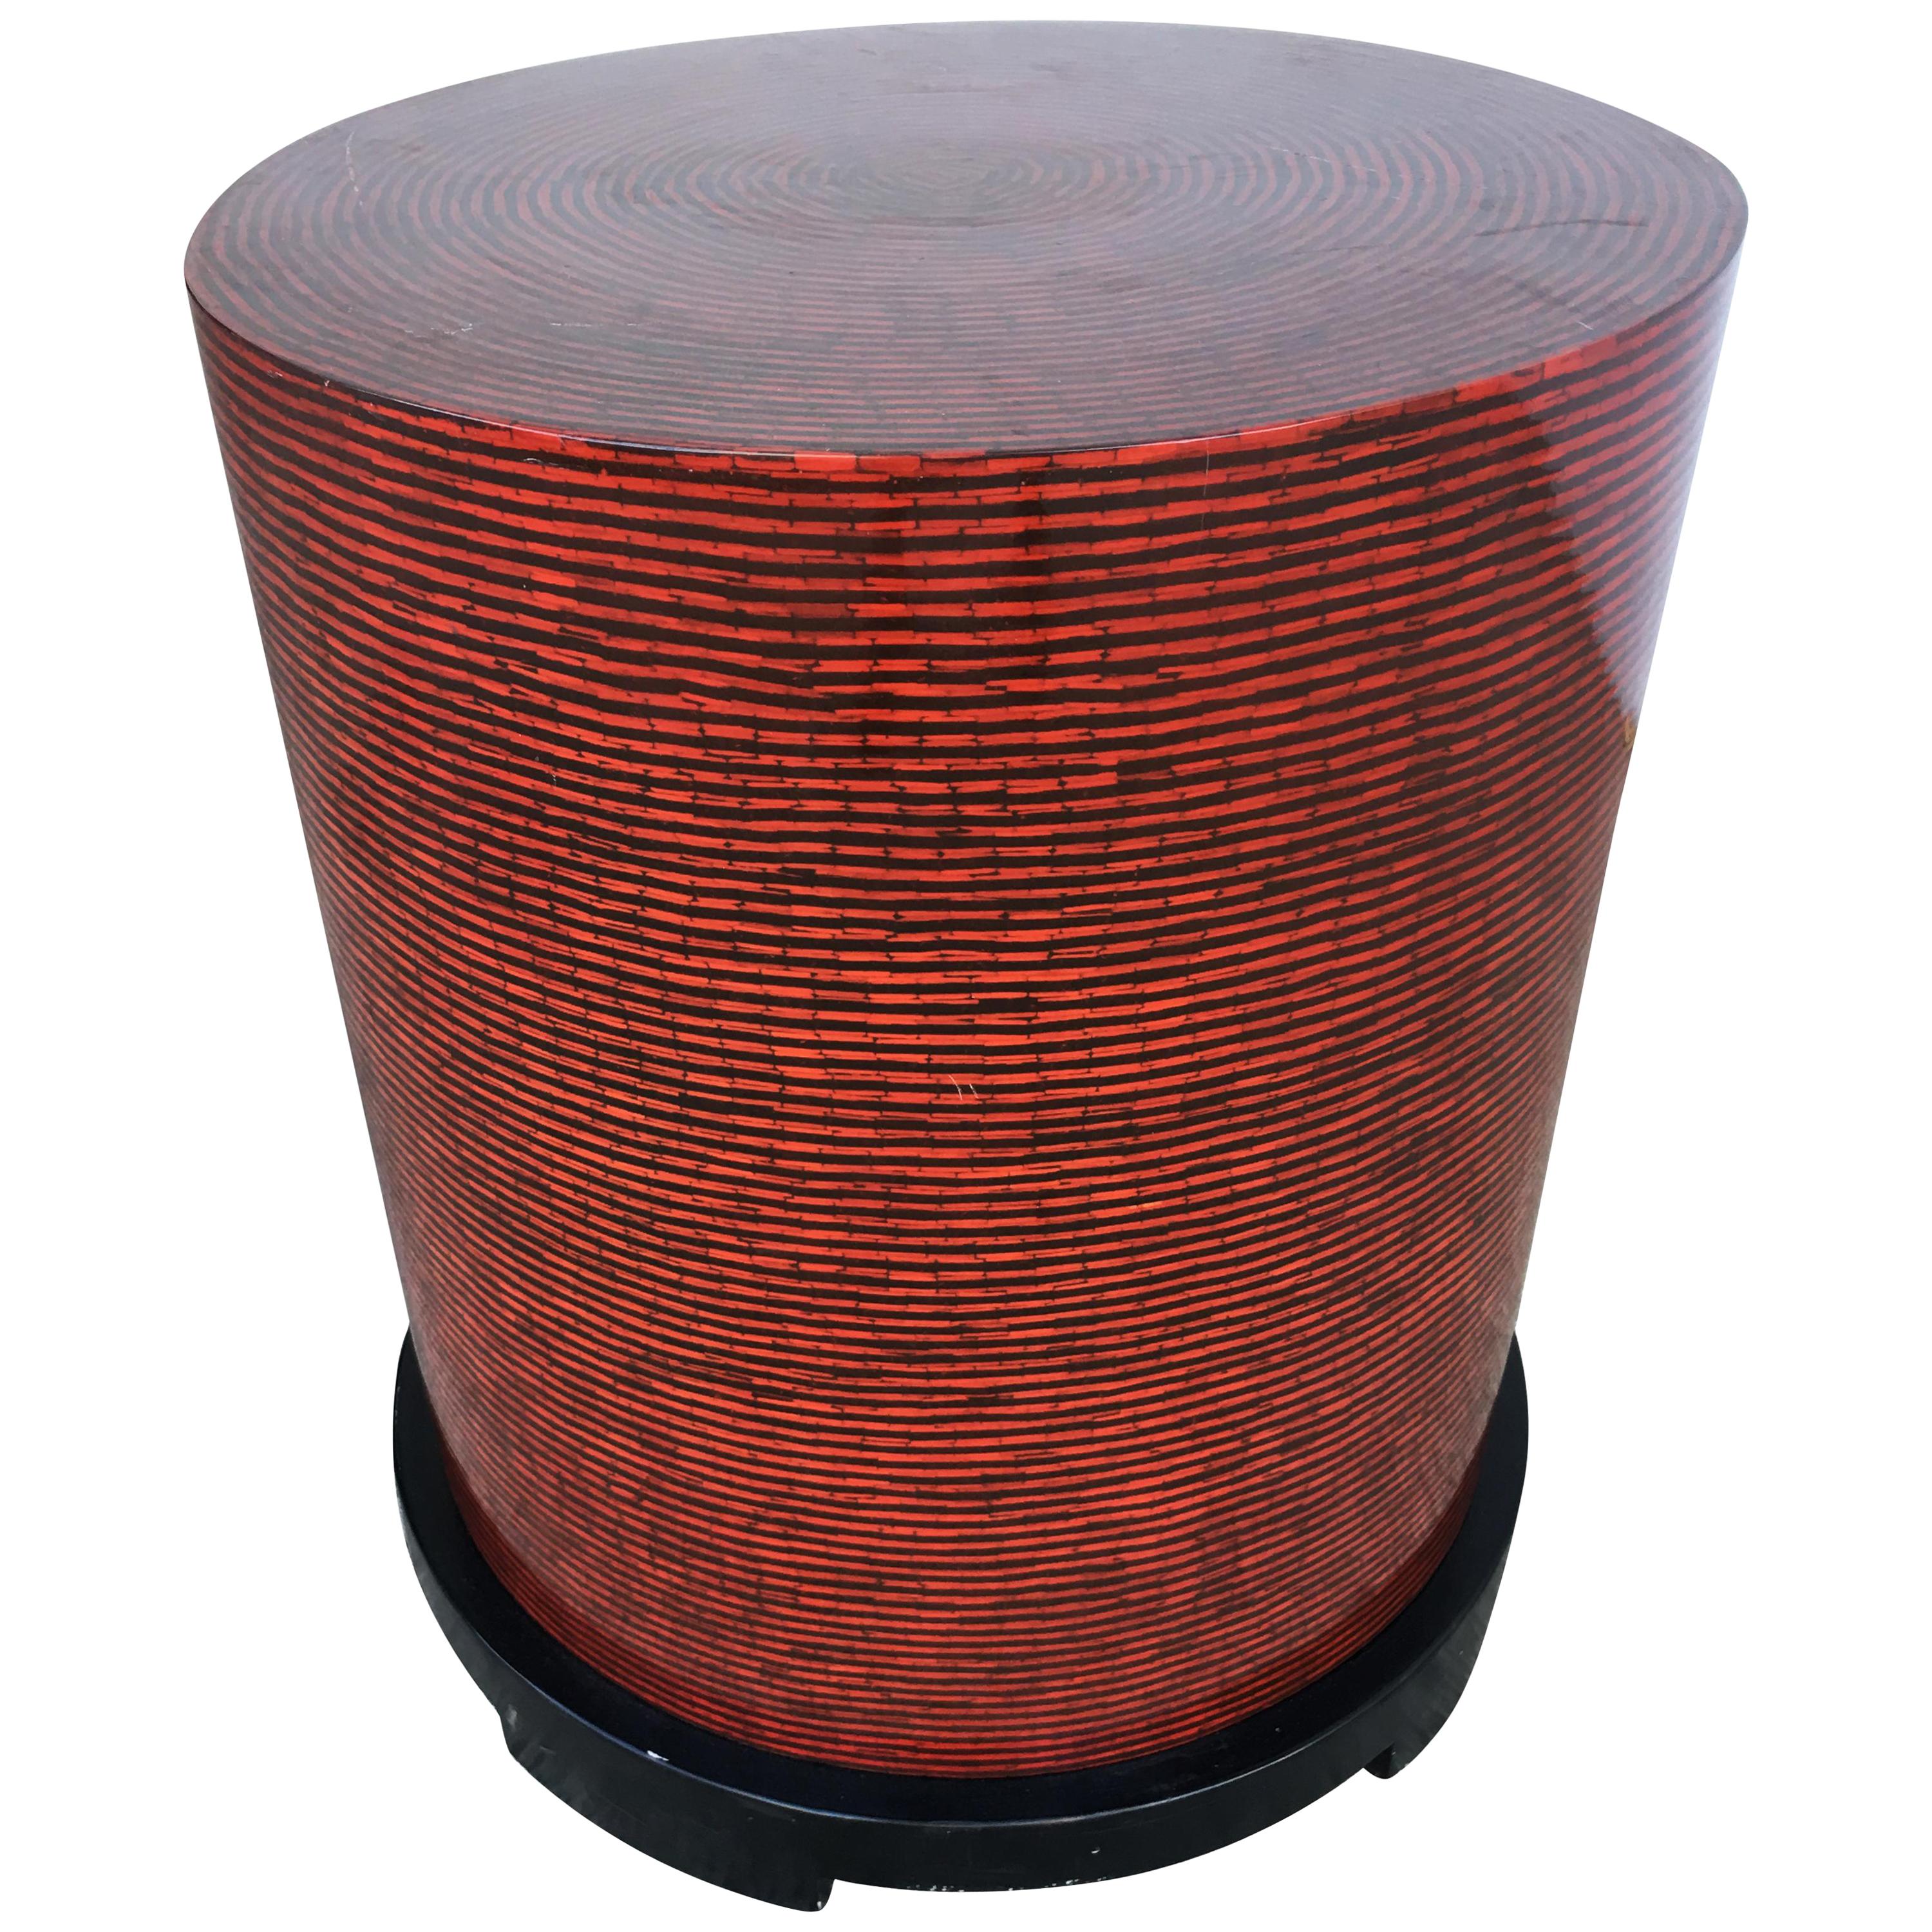 Two-Tone Cubist Style Round Side Table